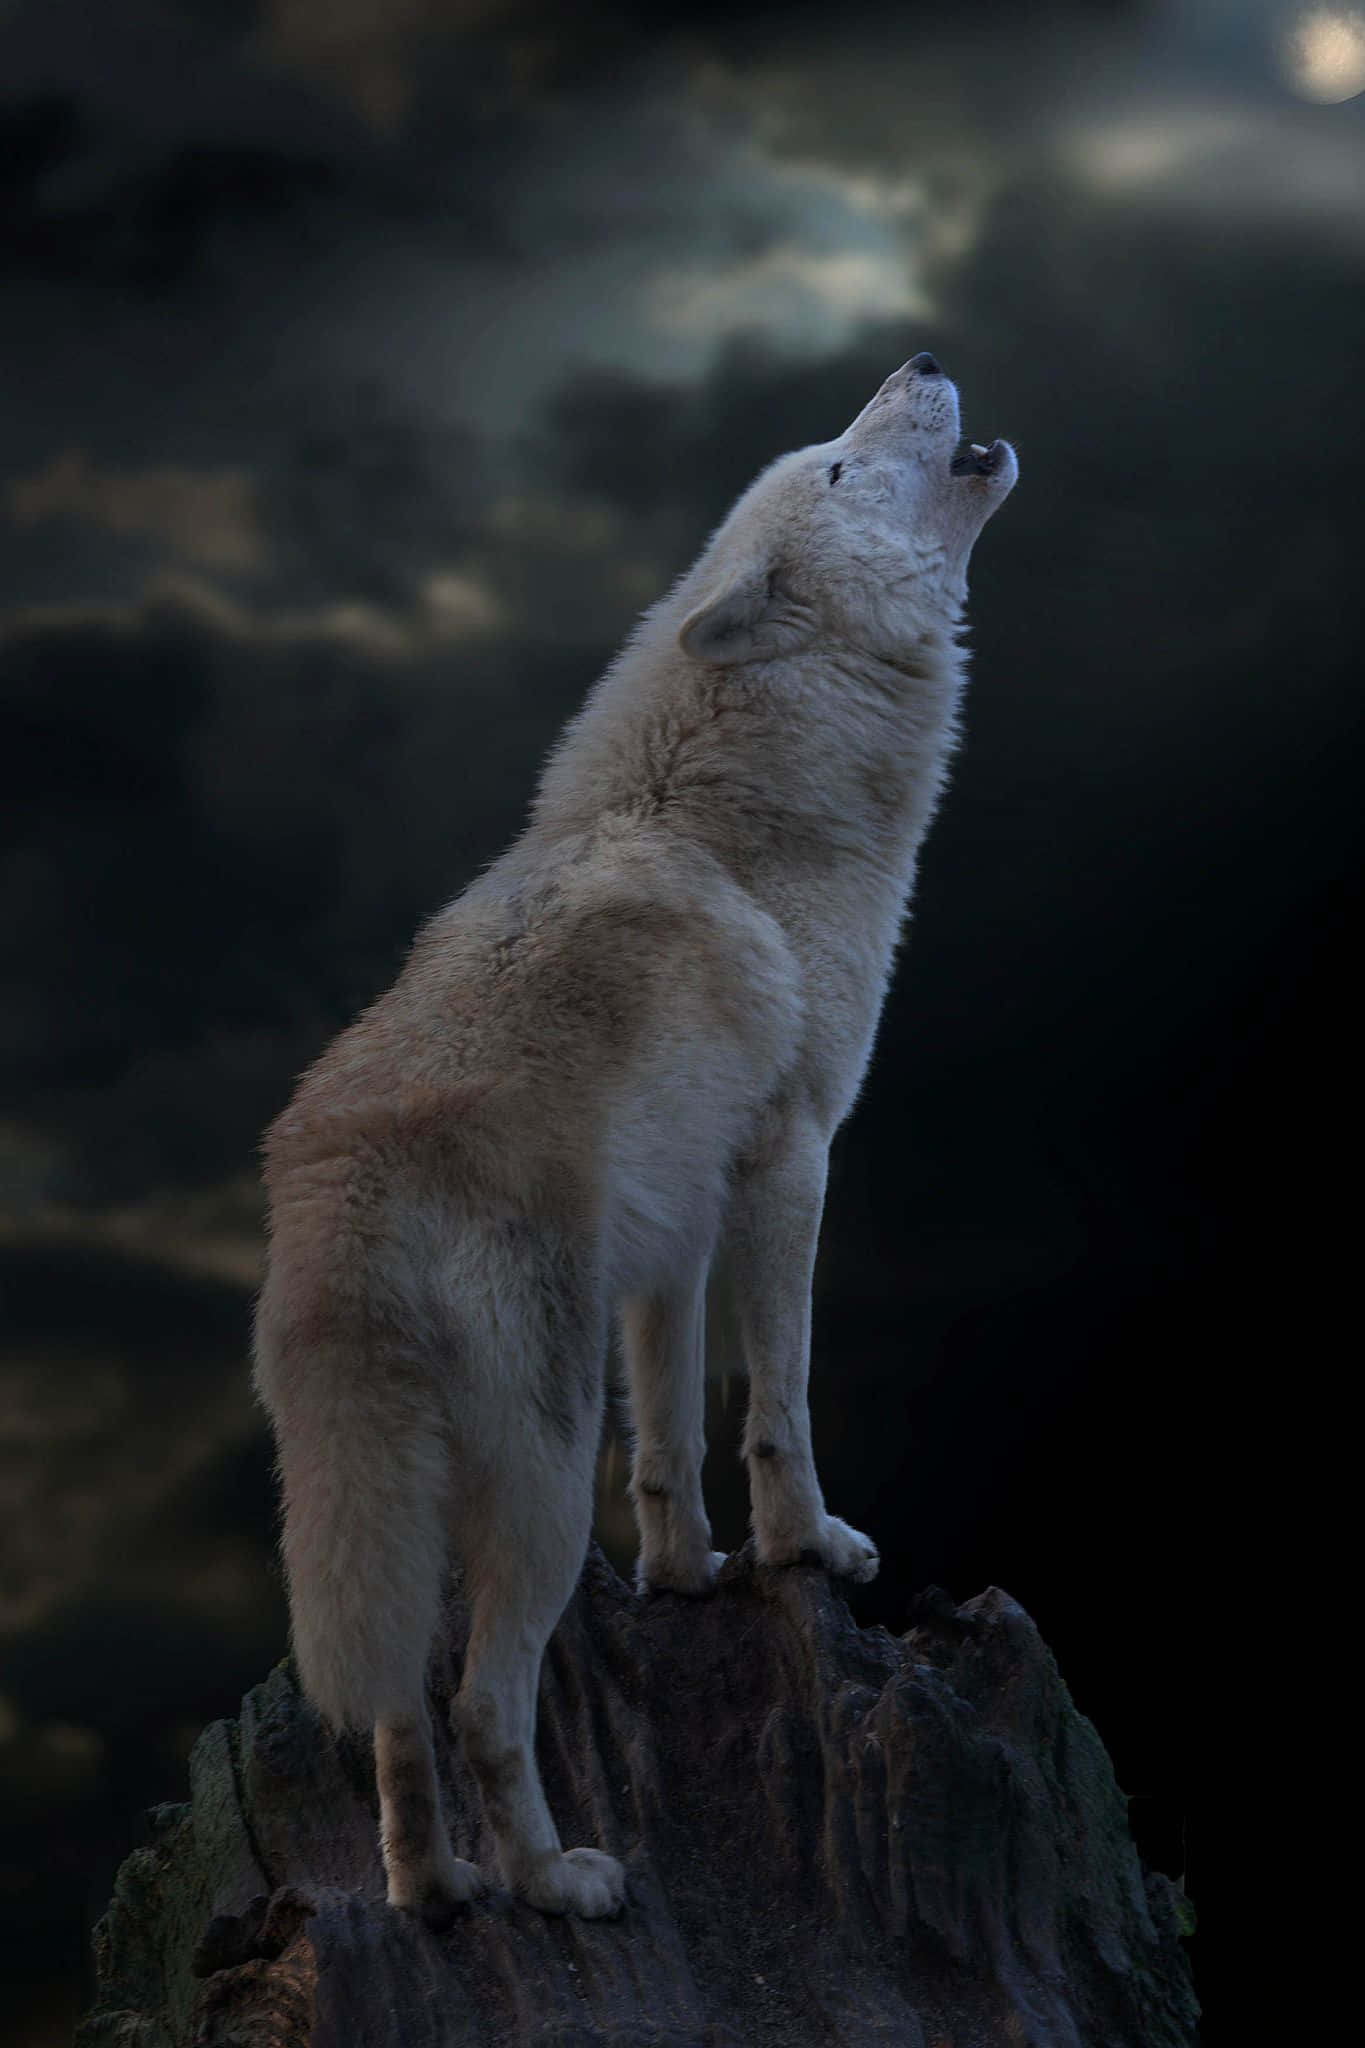 "Artistic rendering of a howling wolf in a night sky"